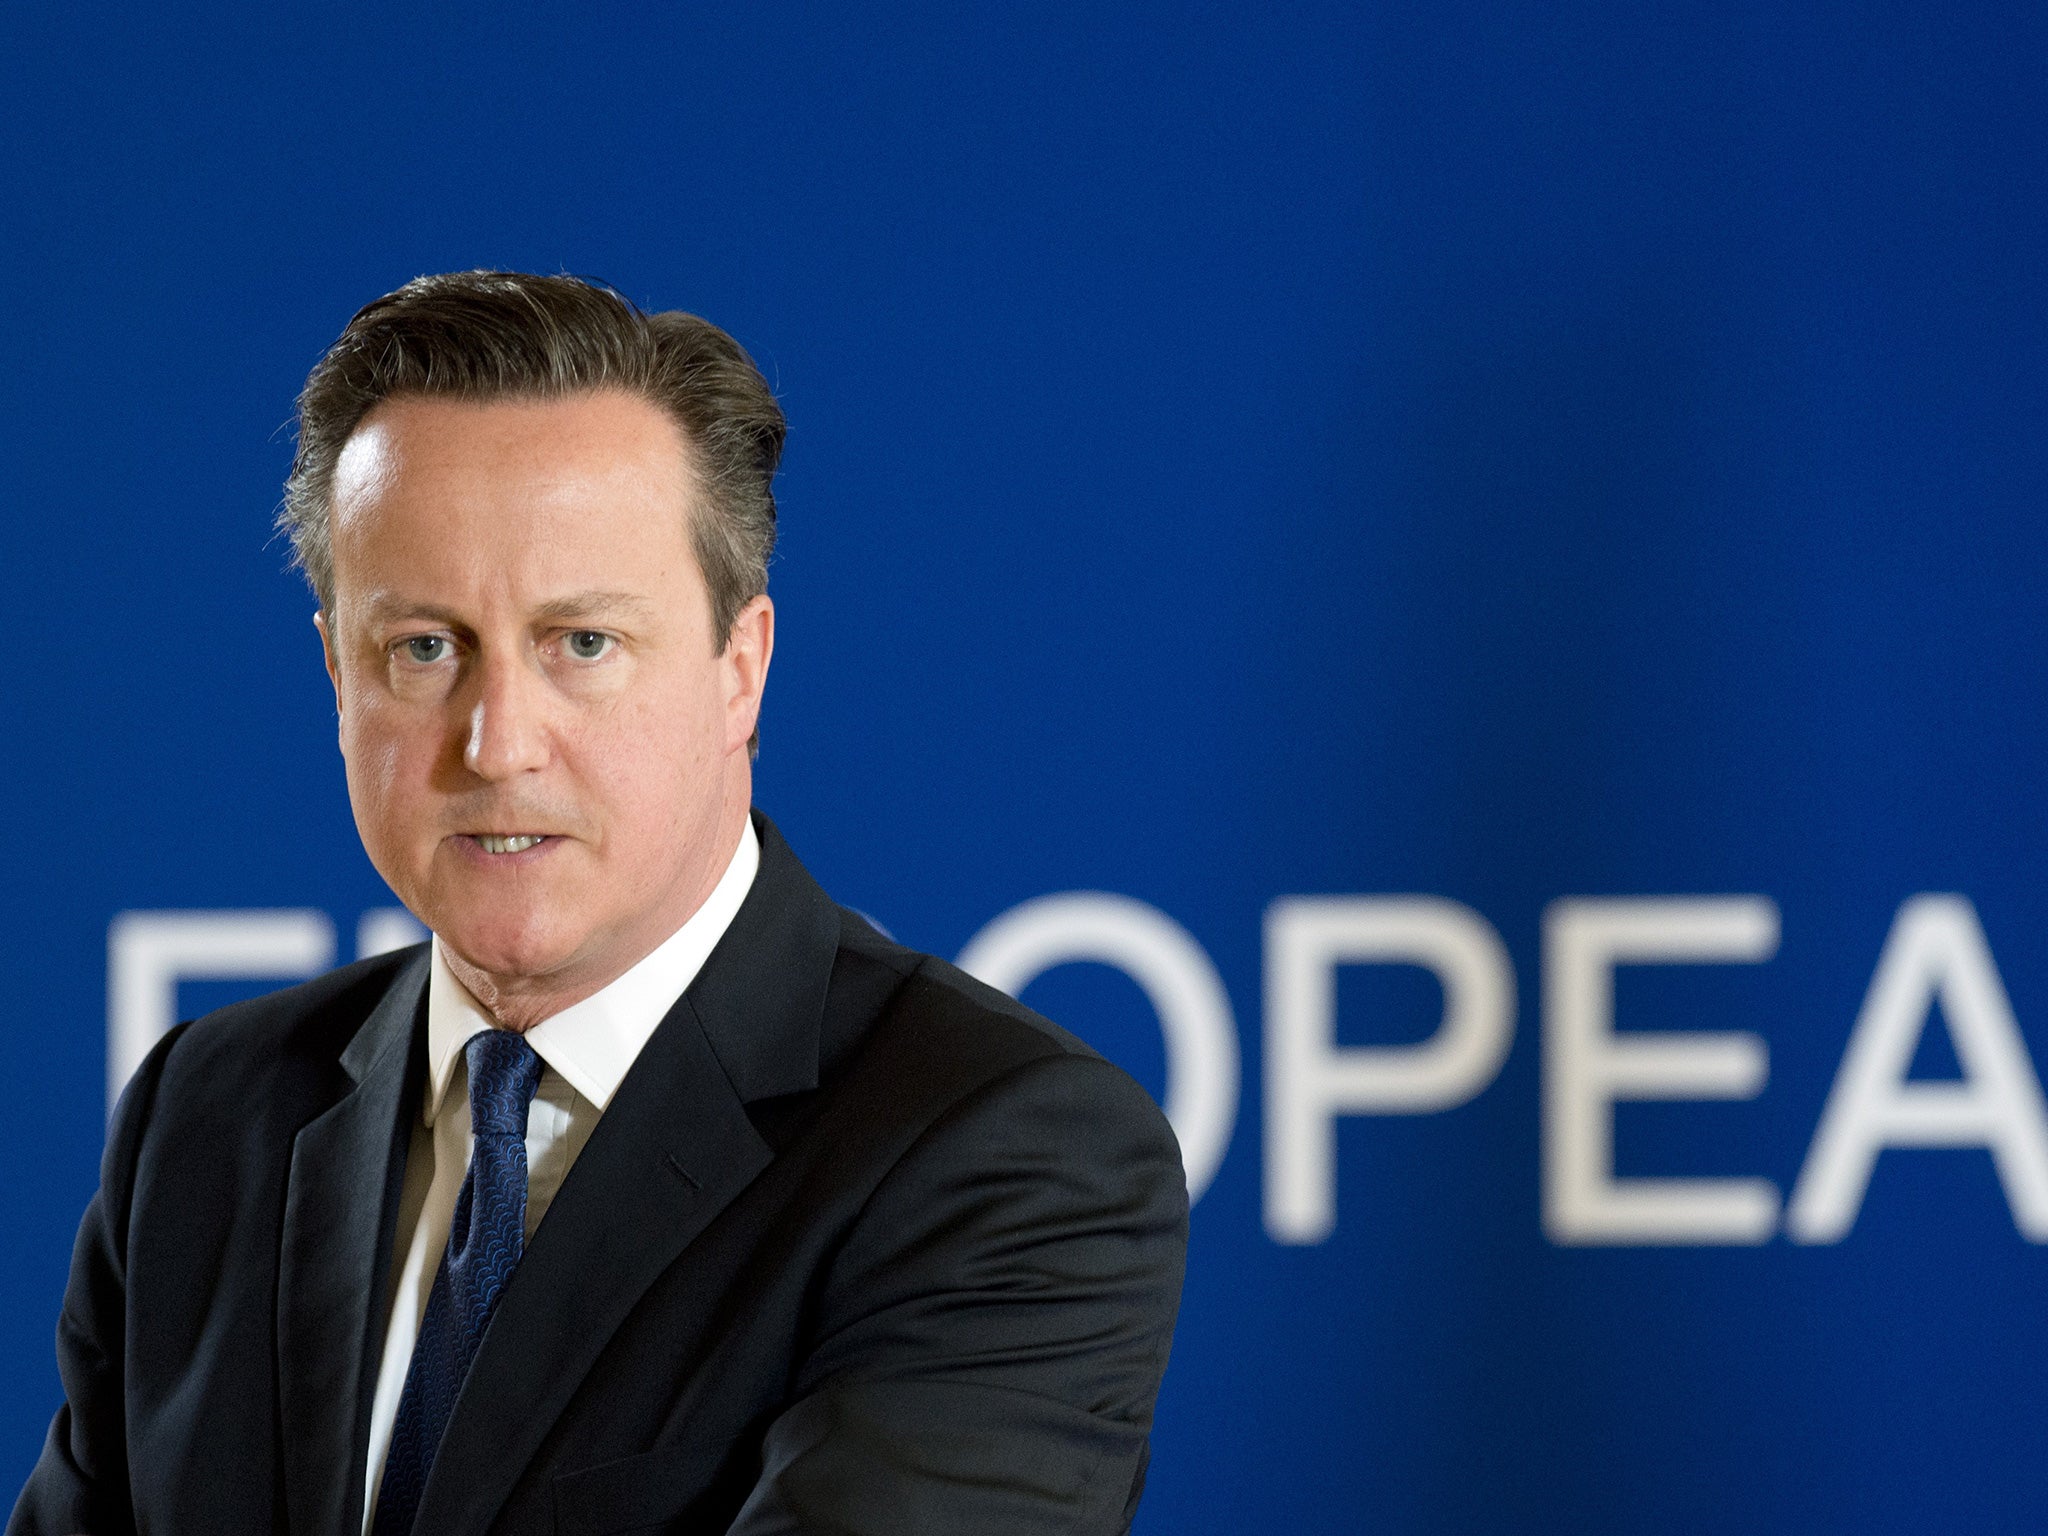 Cameron has announced the Britain will accept 20,000 refugees